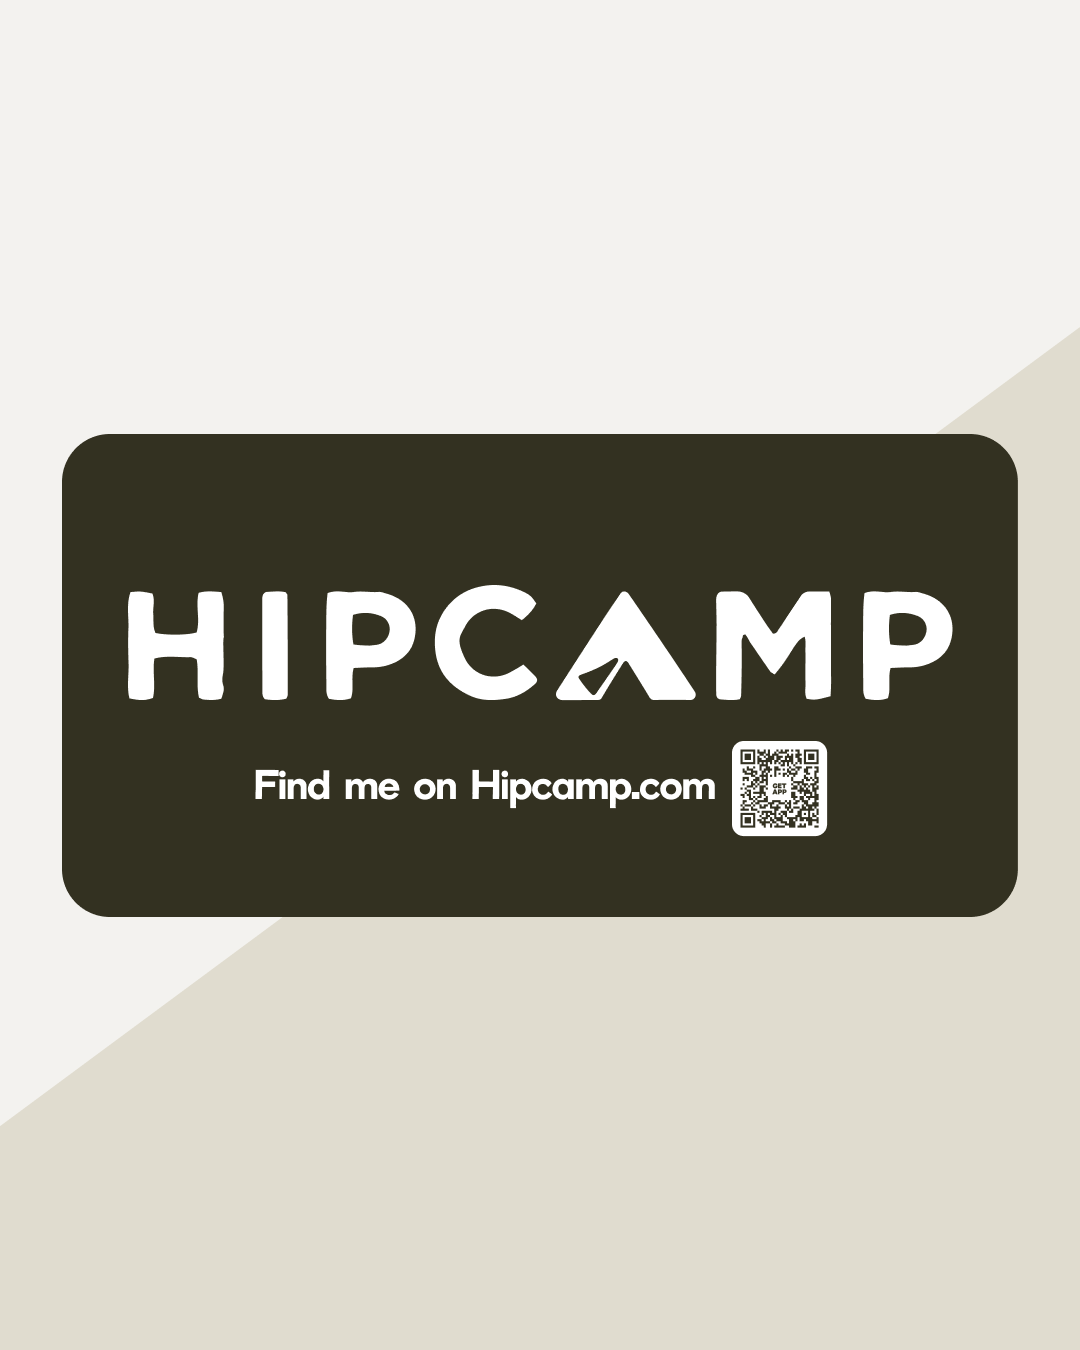 Find me on Hipcamp.com Sign (BH01)